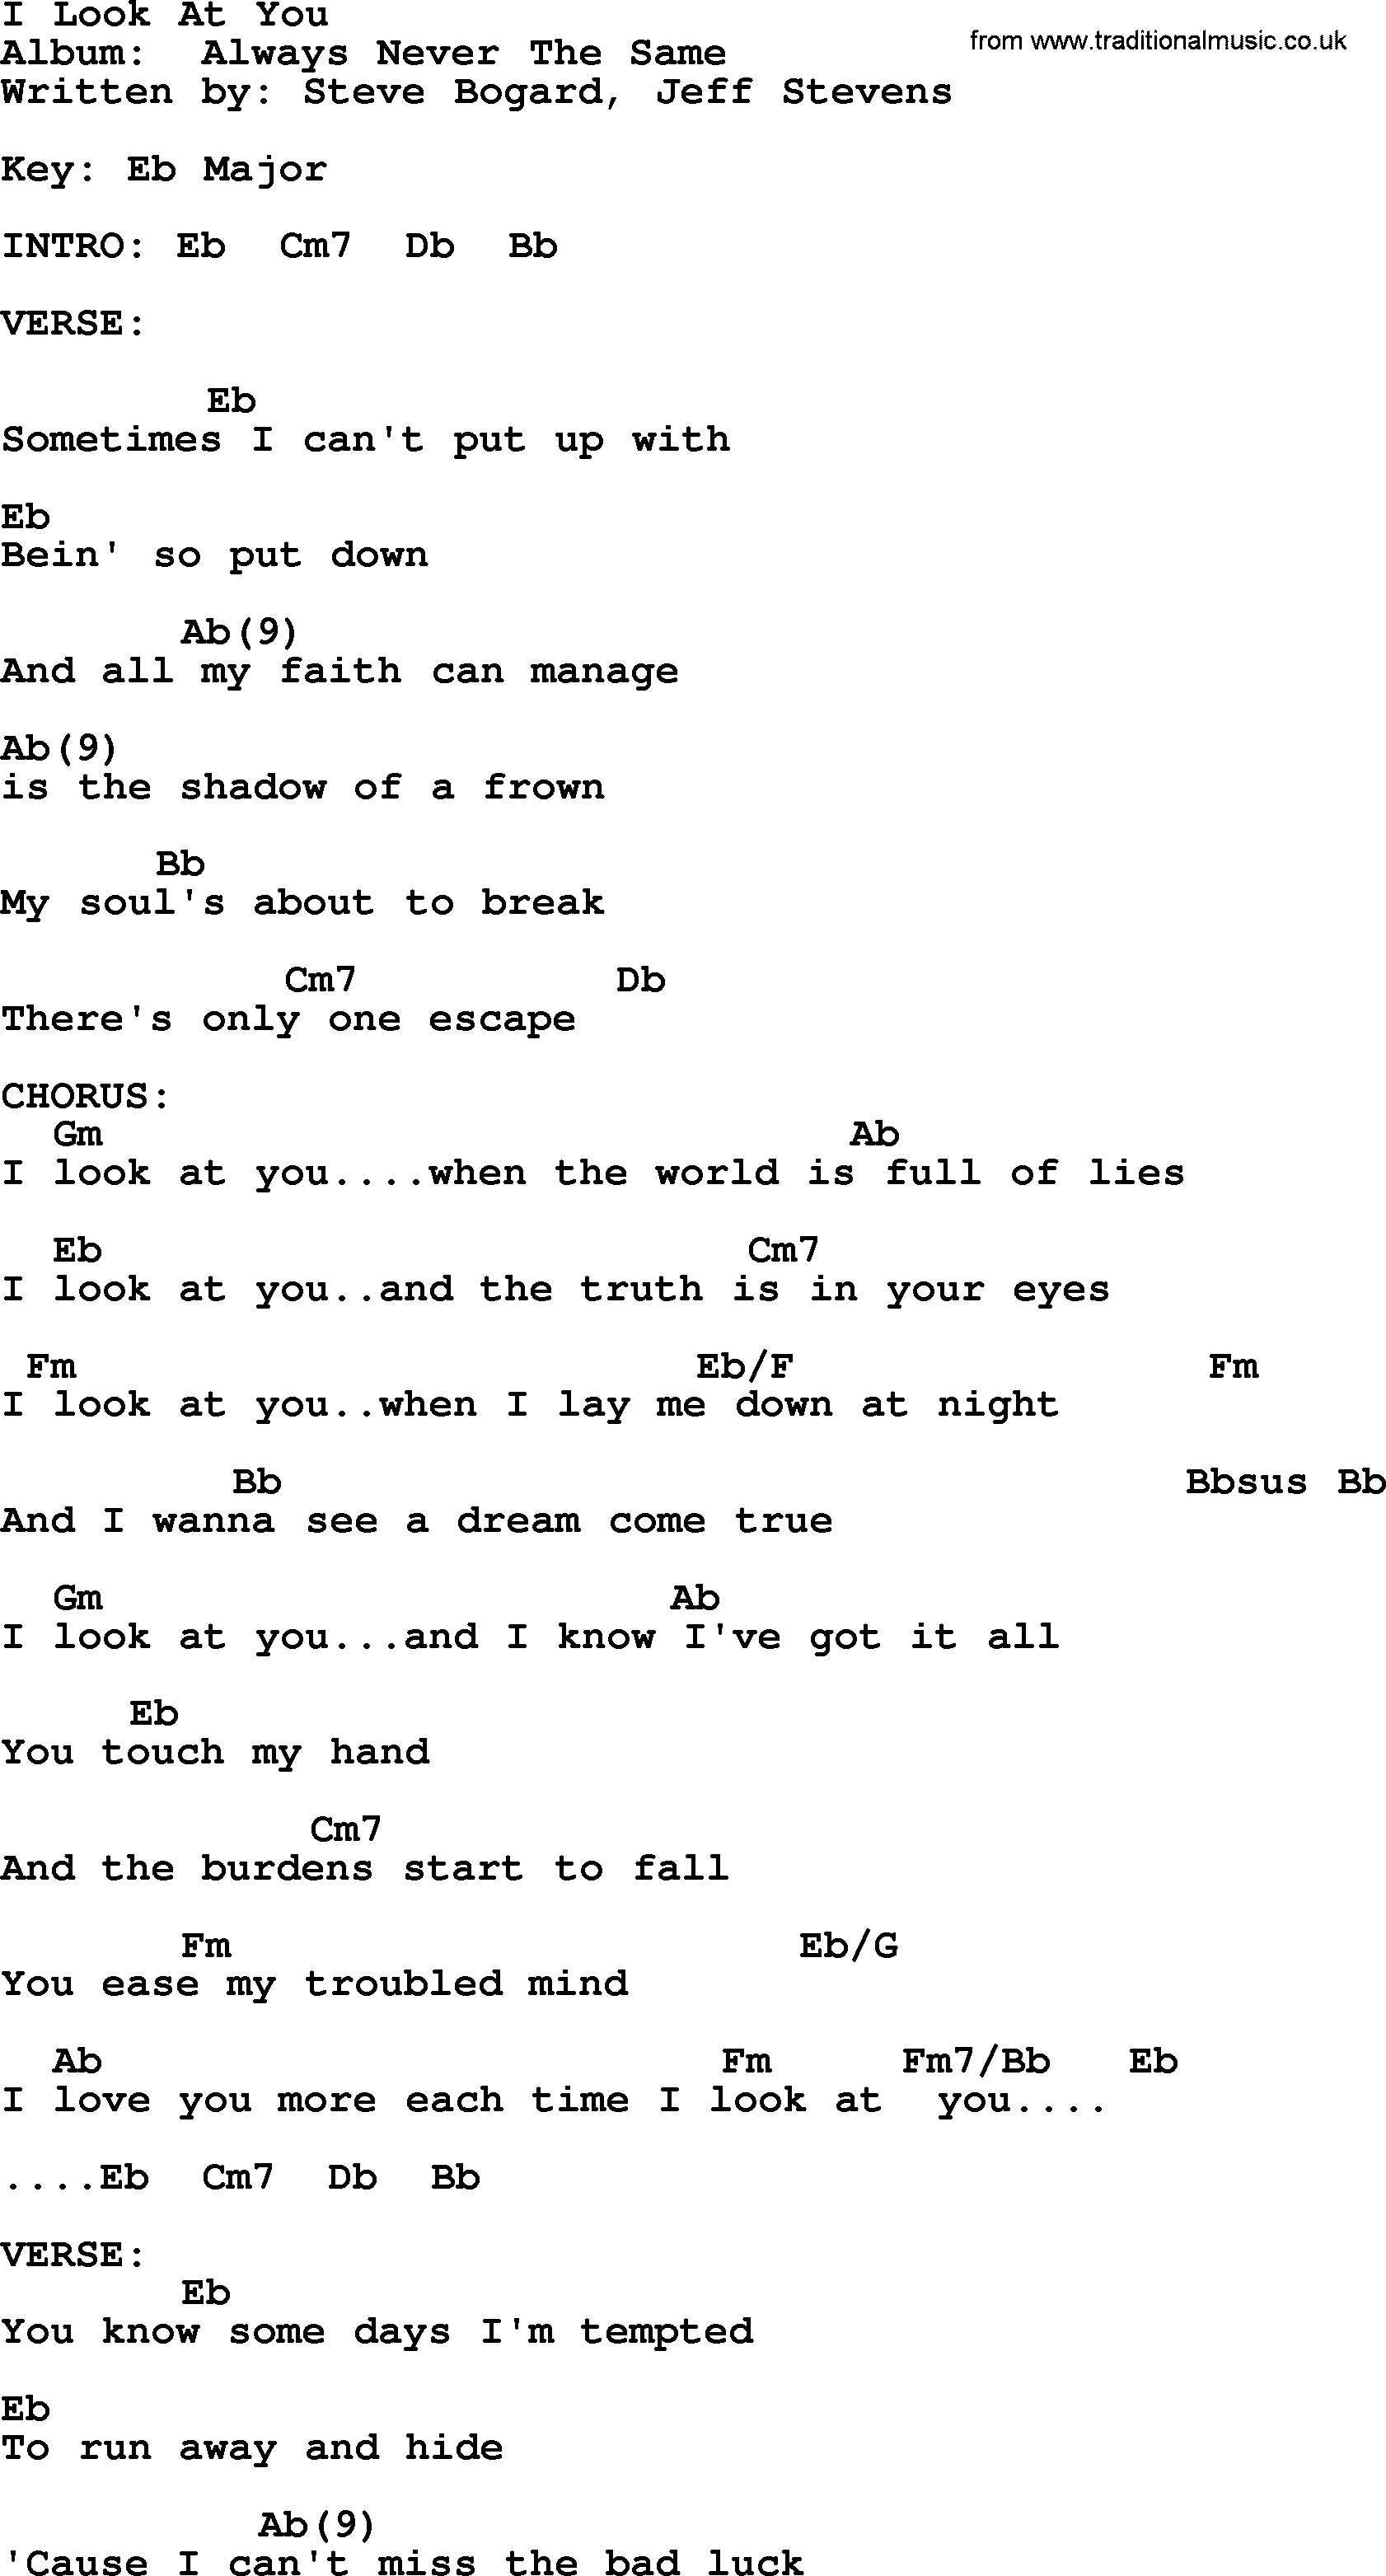 George Strait song: I Look At You, lyrics and chords